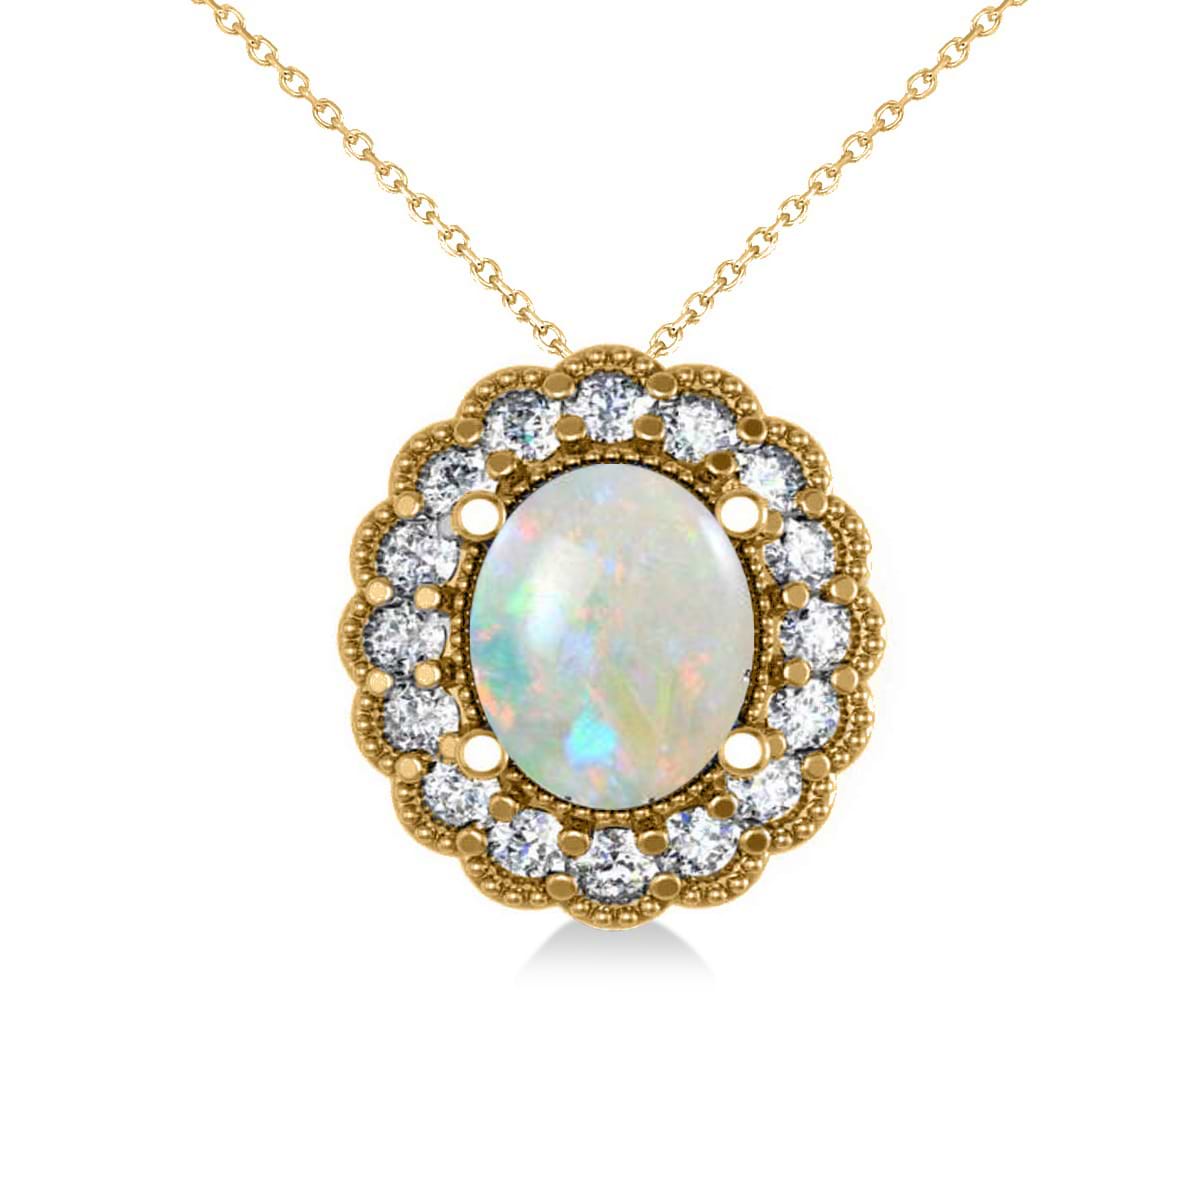 Opal & Diamond Floral Oval Pendant Necklace 14k Yellow Gold (2.98ct)